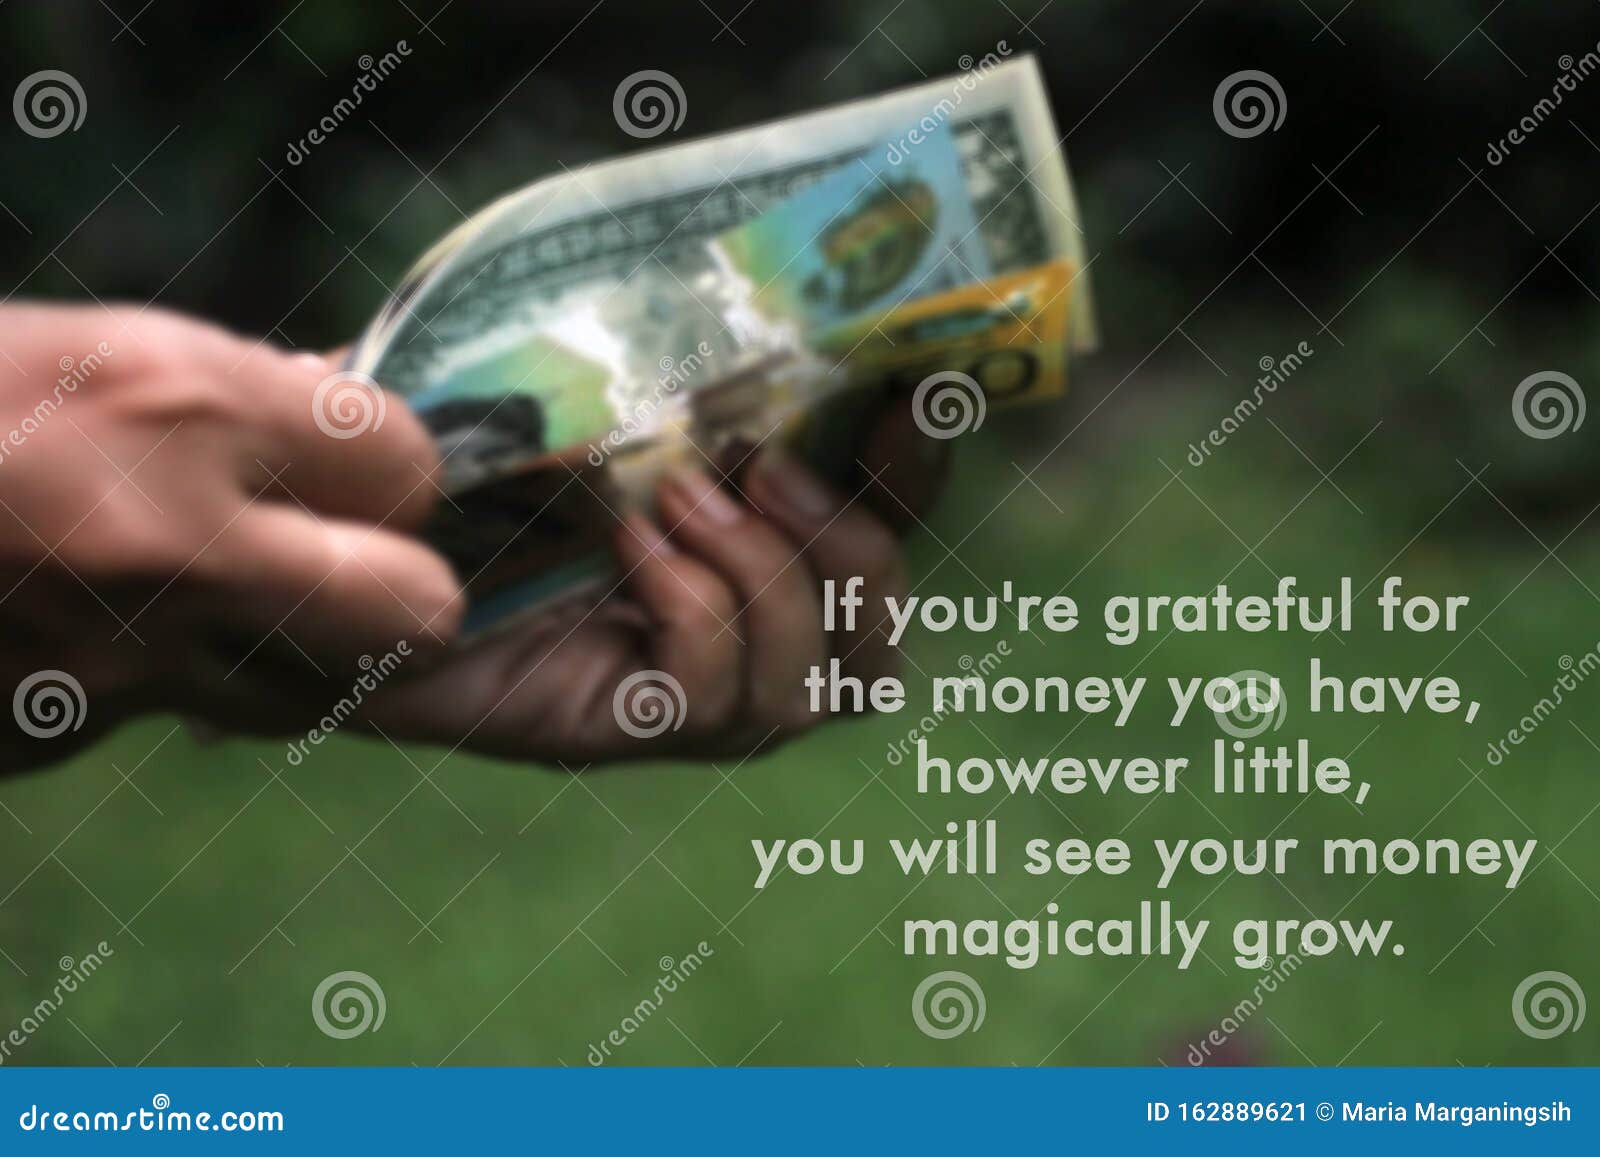 inspirational quote - if you are grateful for the money you have, however little, you will see your money magically grow.